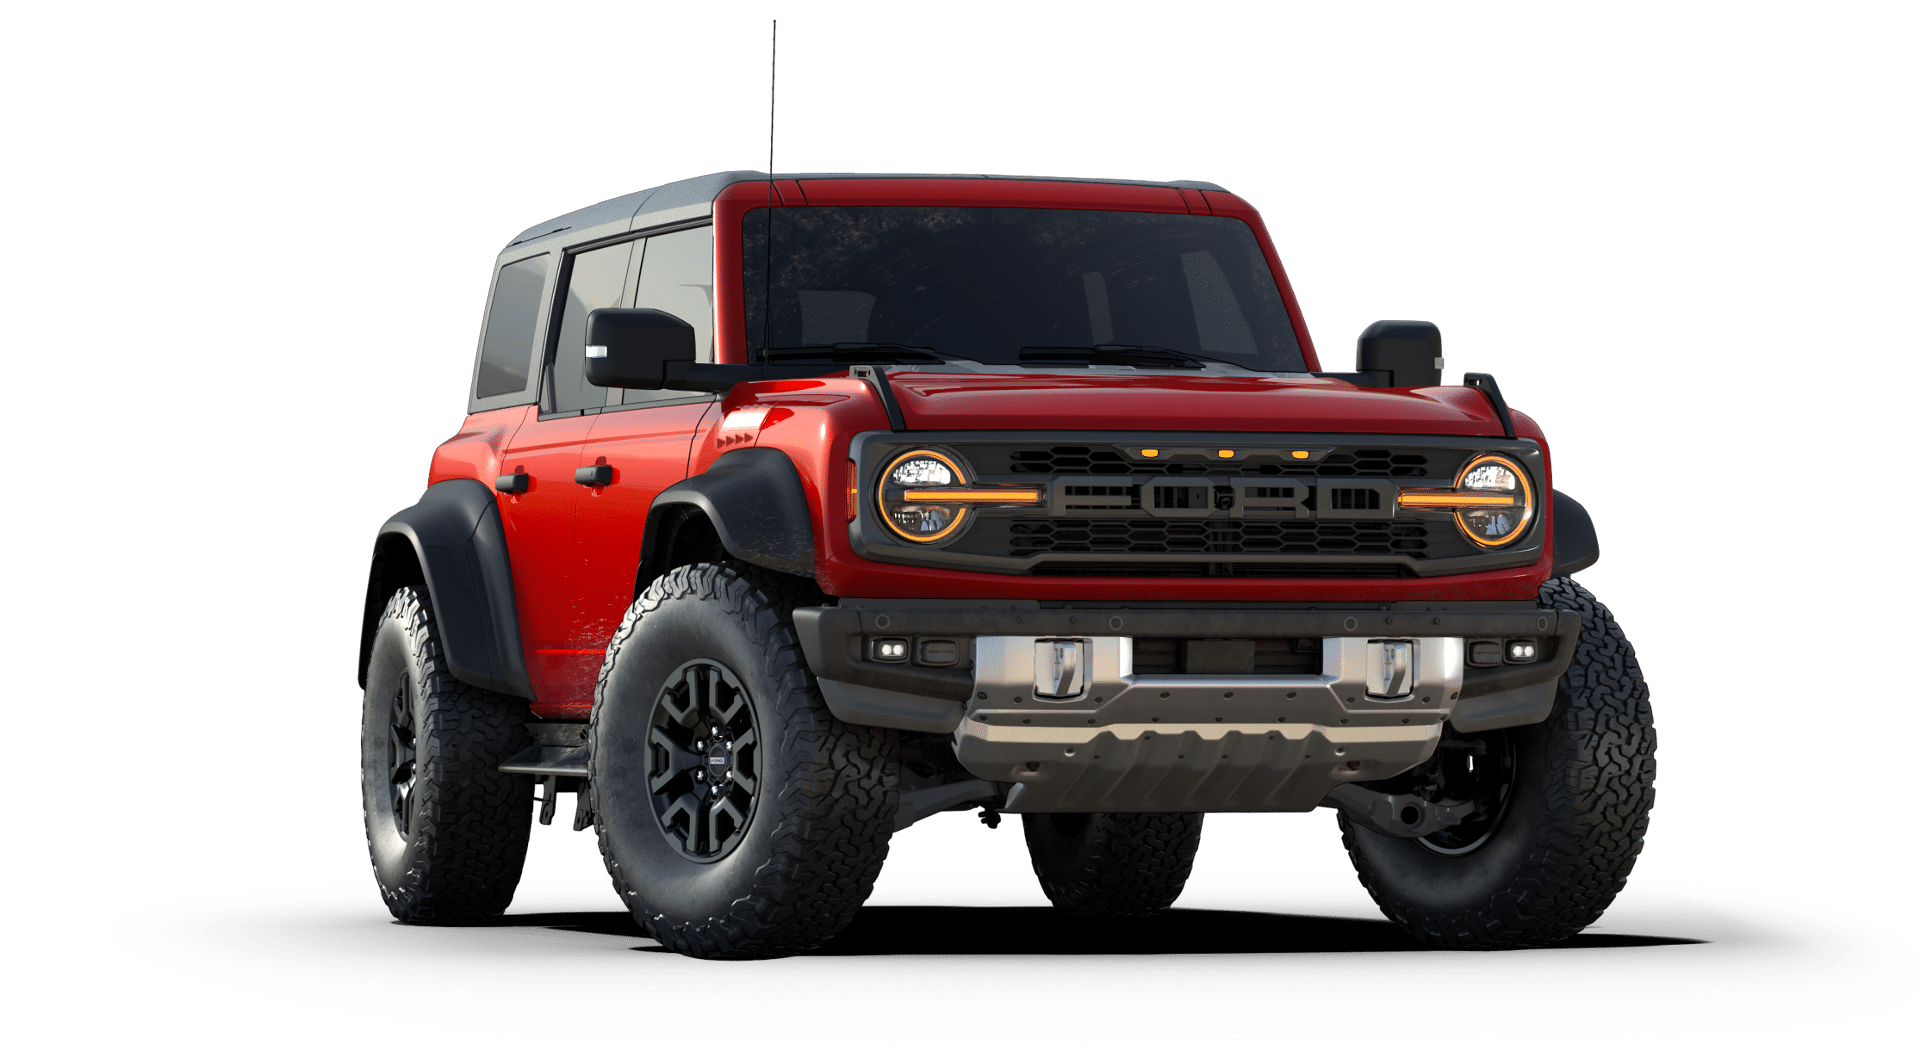 Ford Bronco™ SUV against a white background